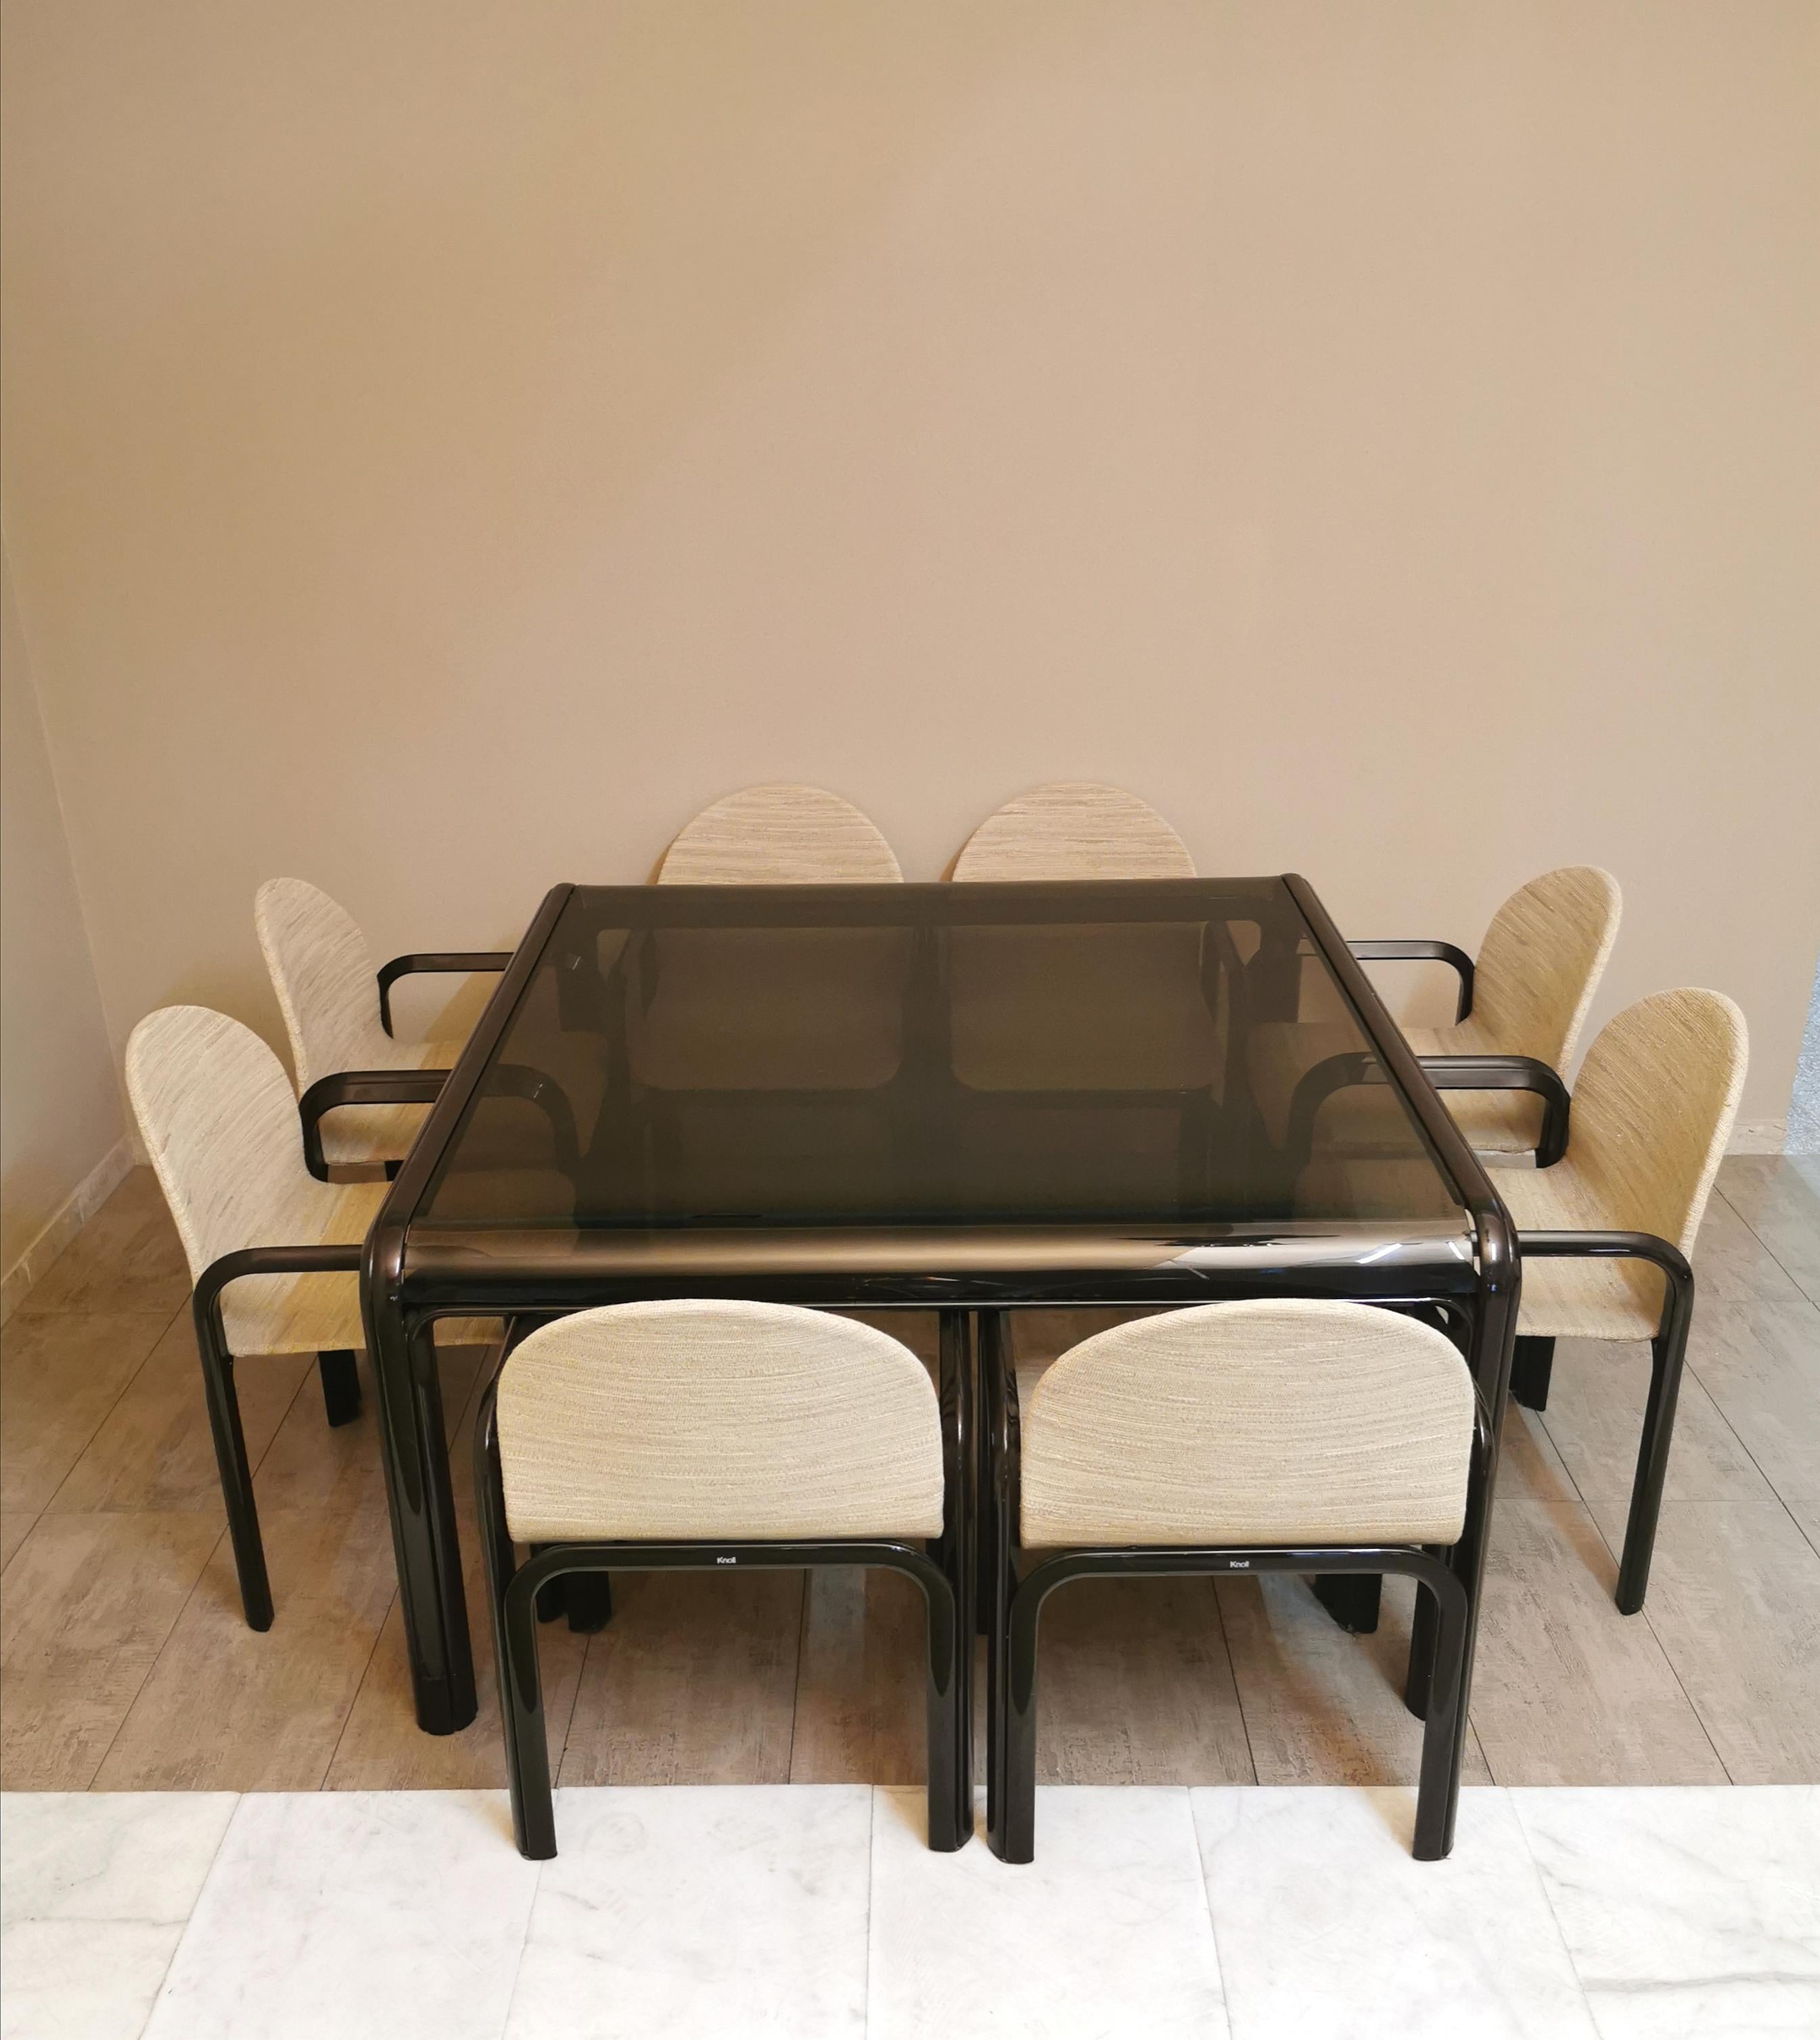 Set of 8 chairs and 1 dining table designed by the Italian designer Gae Aulenti and produced by the US company Knoll International which produces furniture items for offices and homes. The table and chairs have a brown enamelled aluminum frame. The